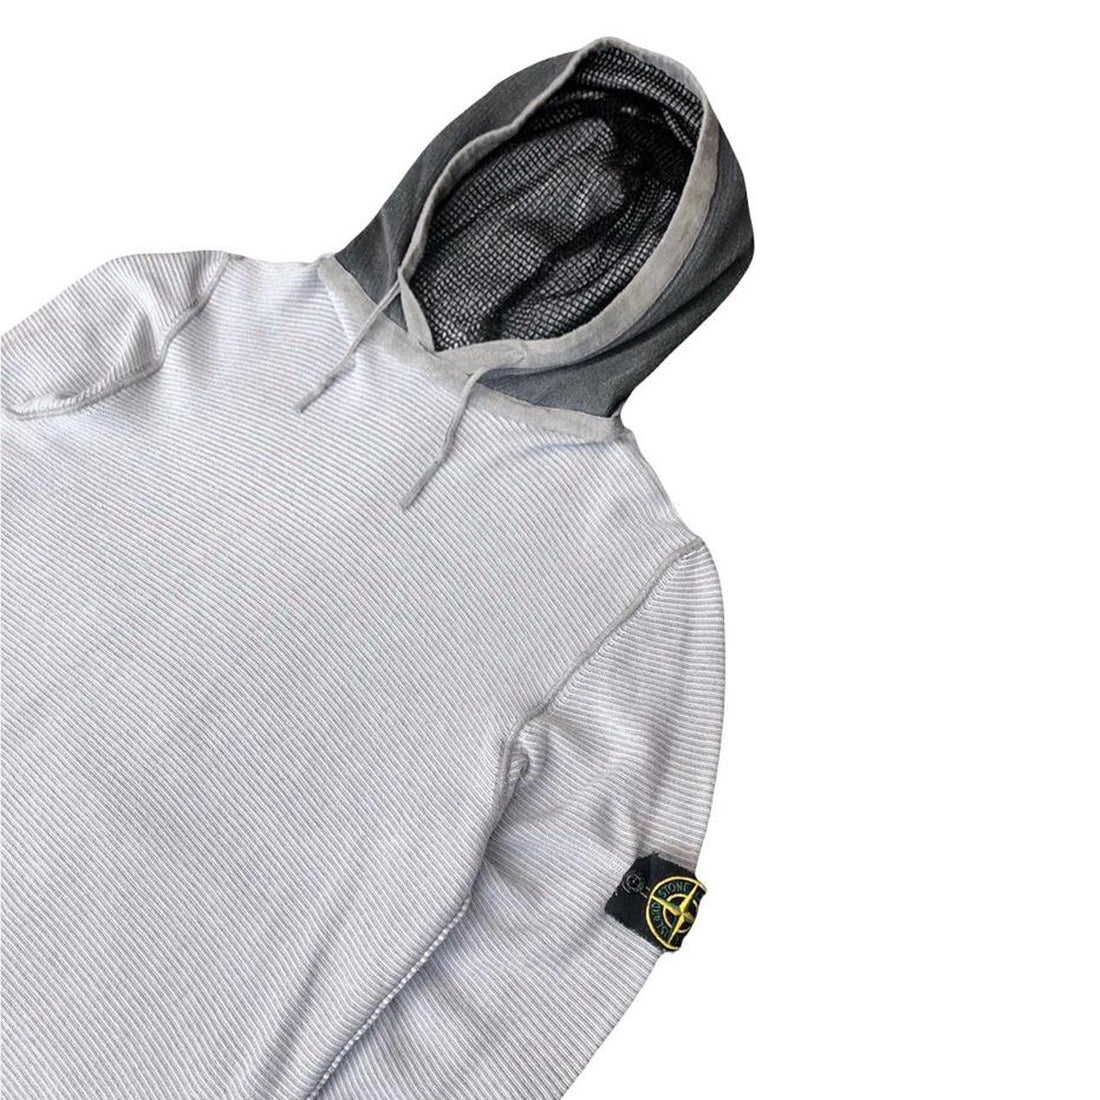 Stone Island pullover ribbed hoodie